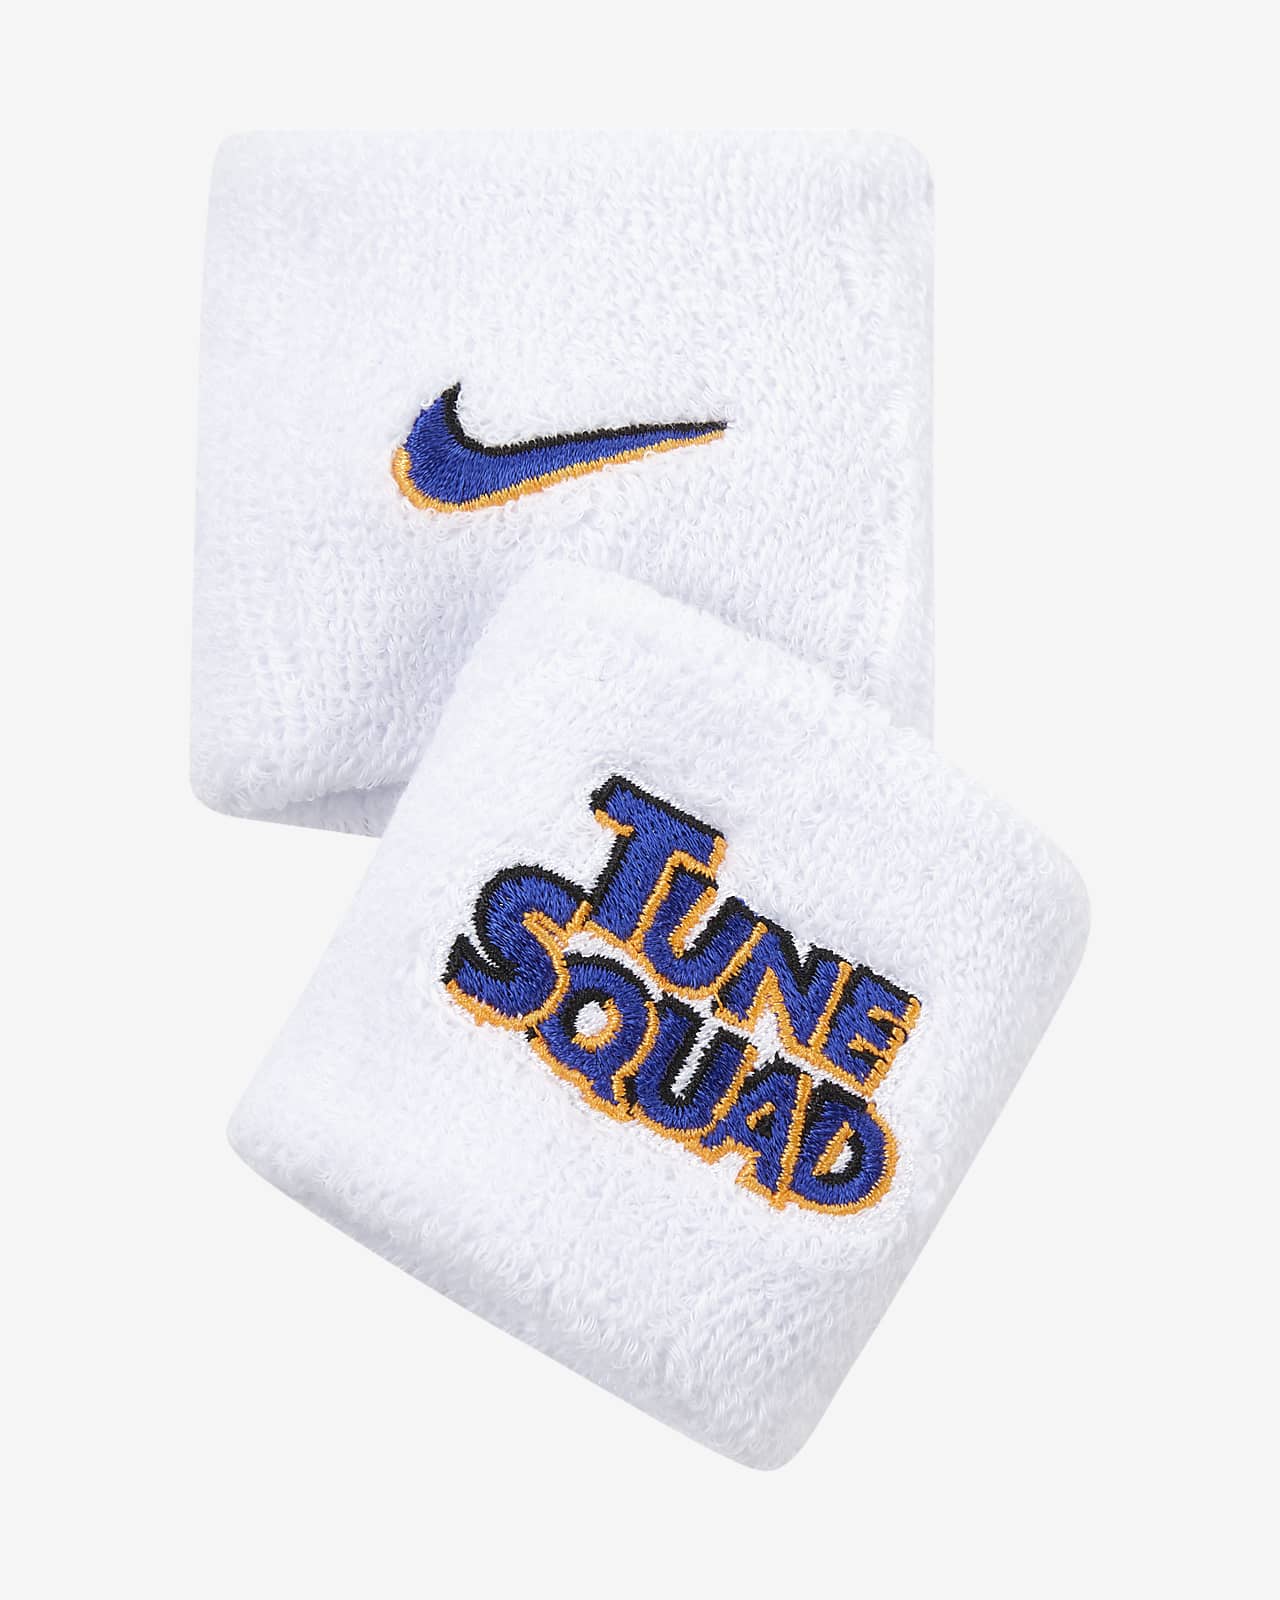 Nike Swoosh x Space Jam: A New Legacy Wristbands (2-Pack)